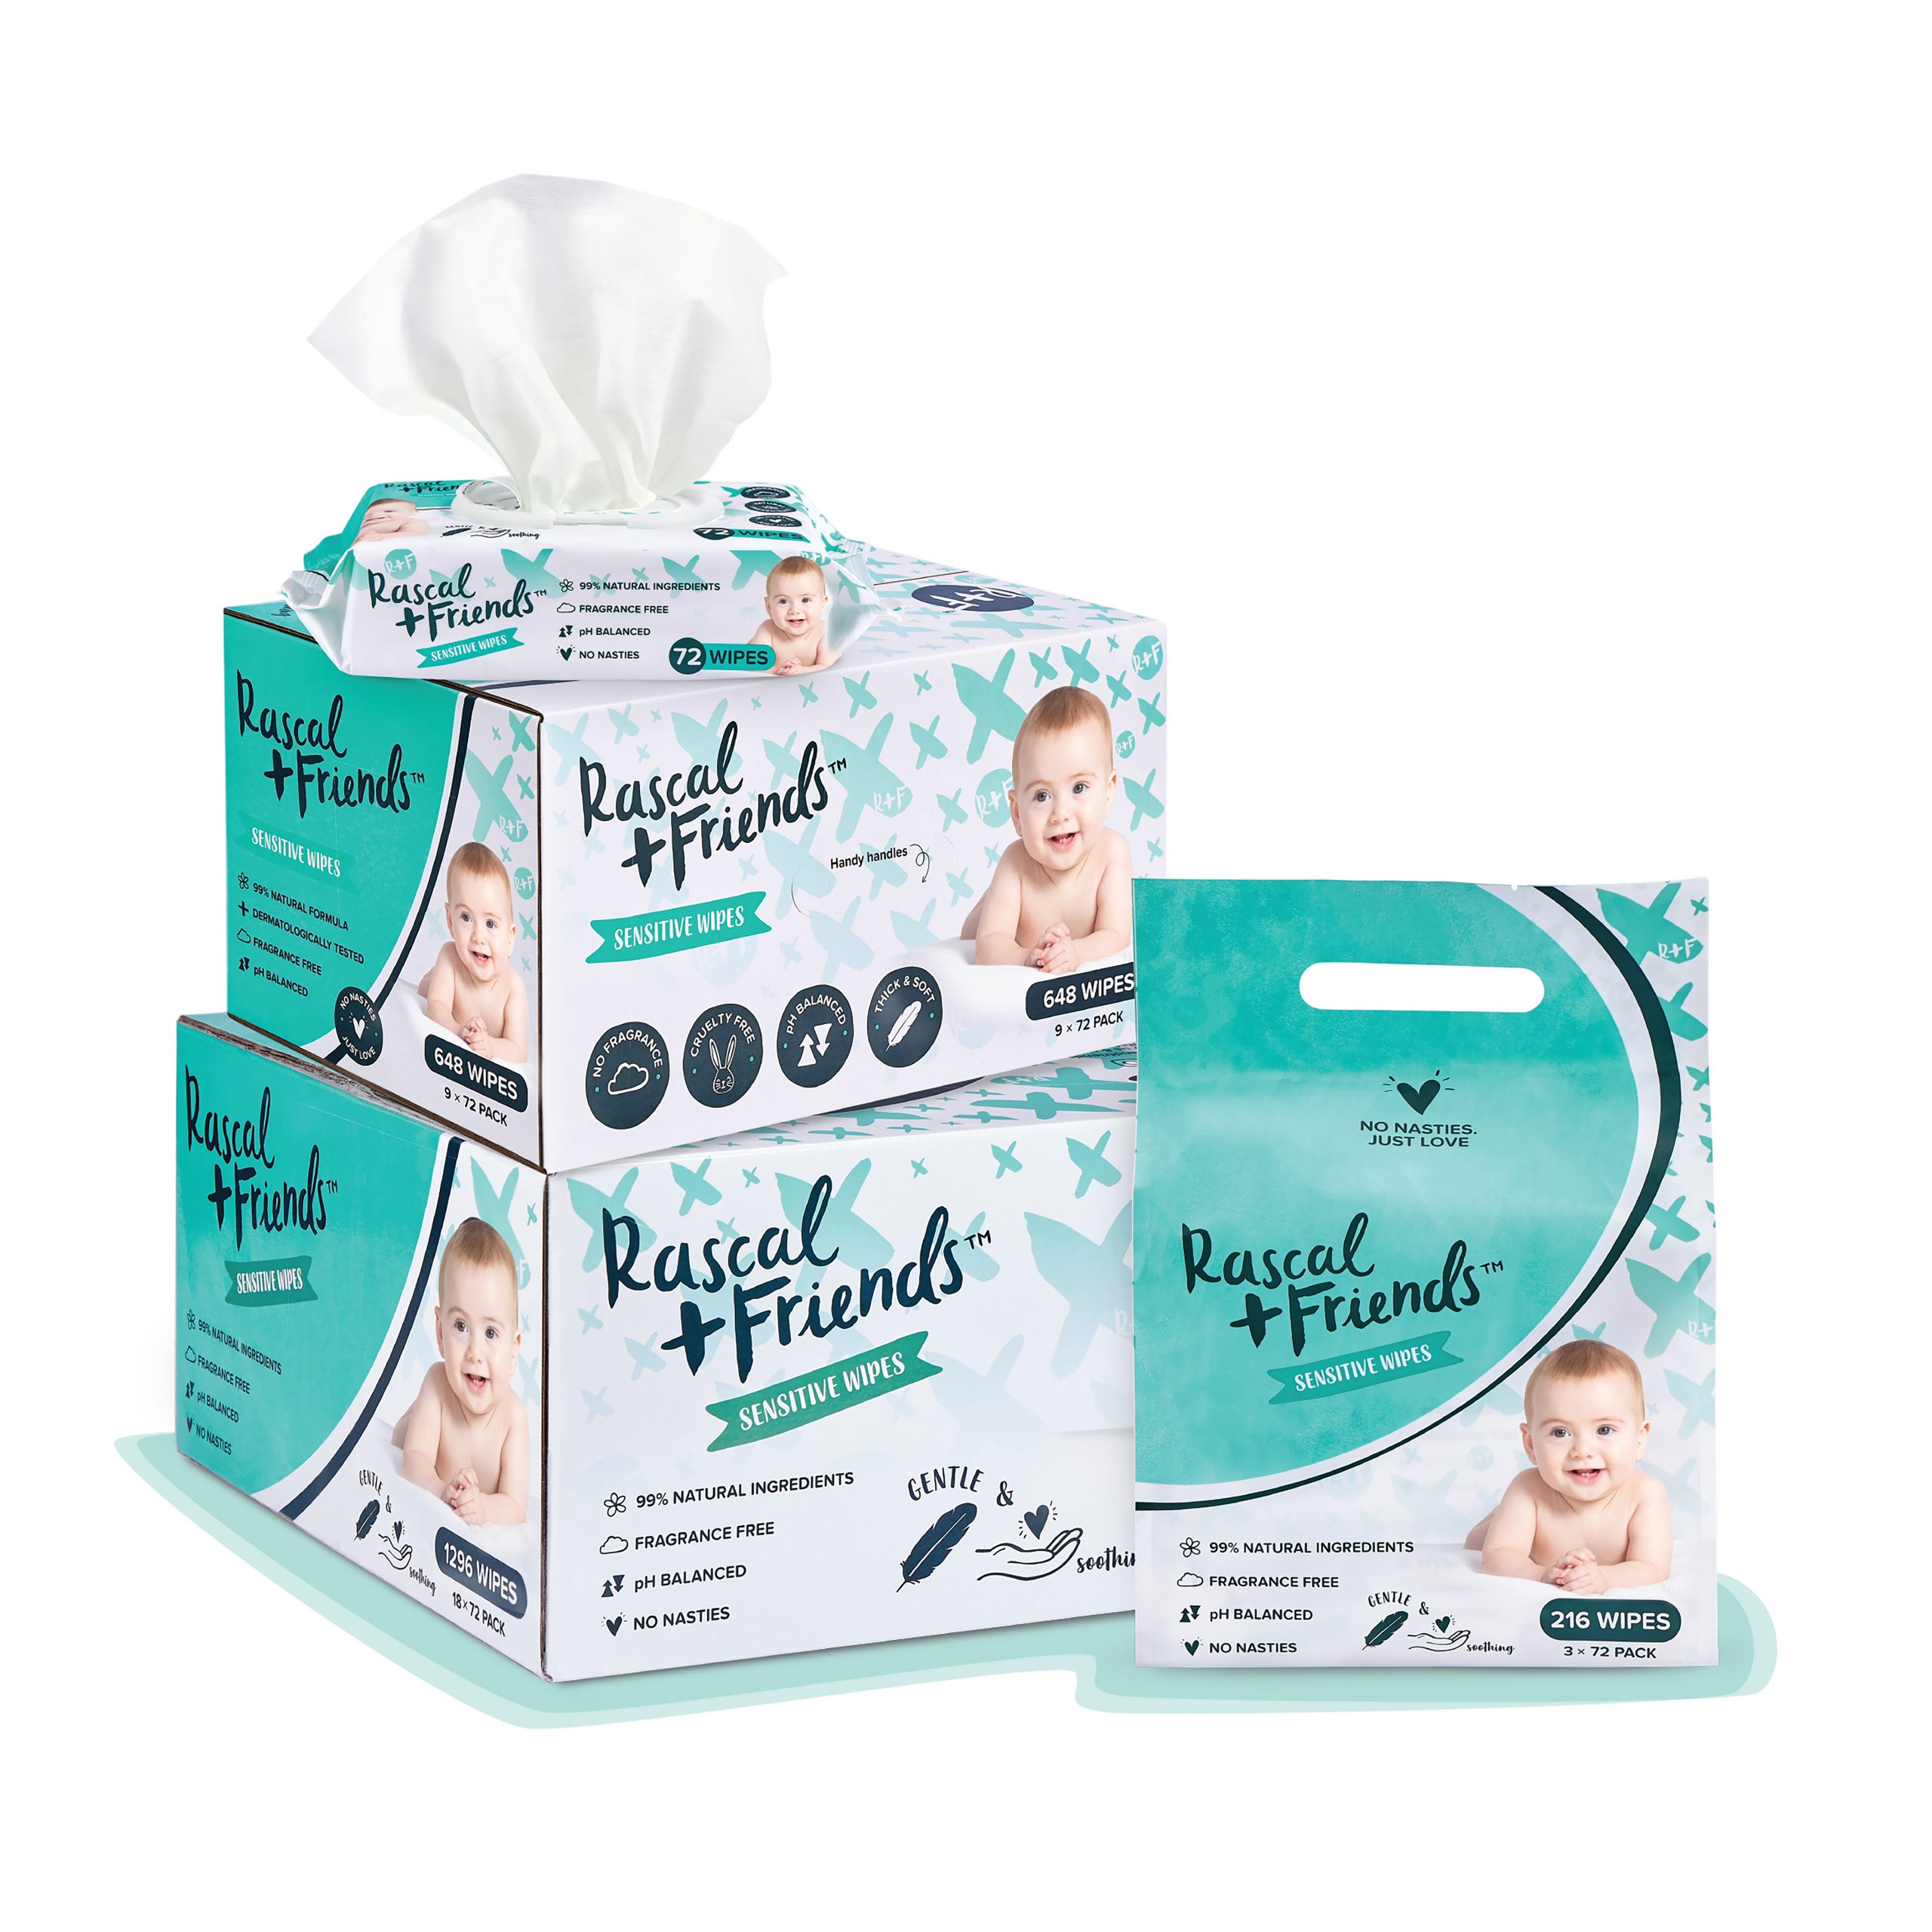 Rascal + Friends Sensitive Wipes Best for Baby NAPPA Awards